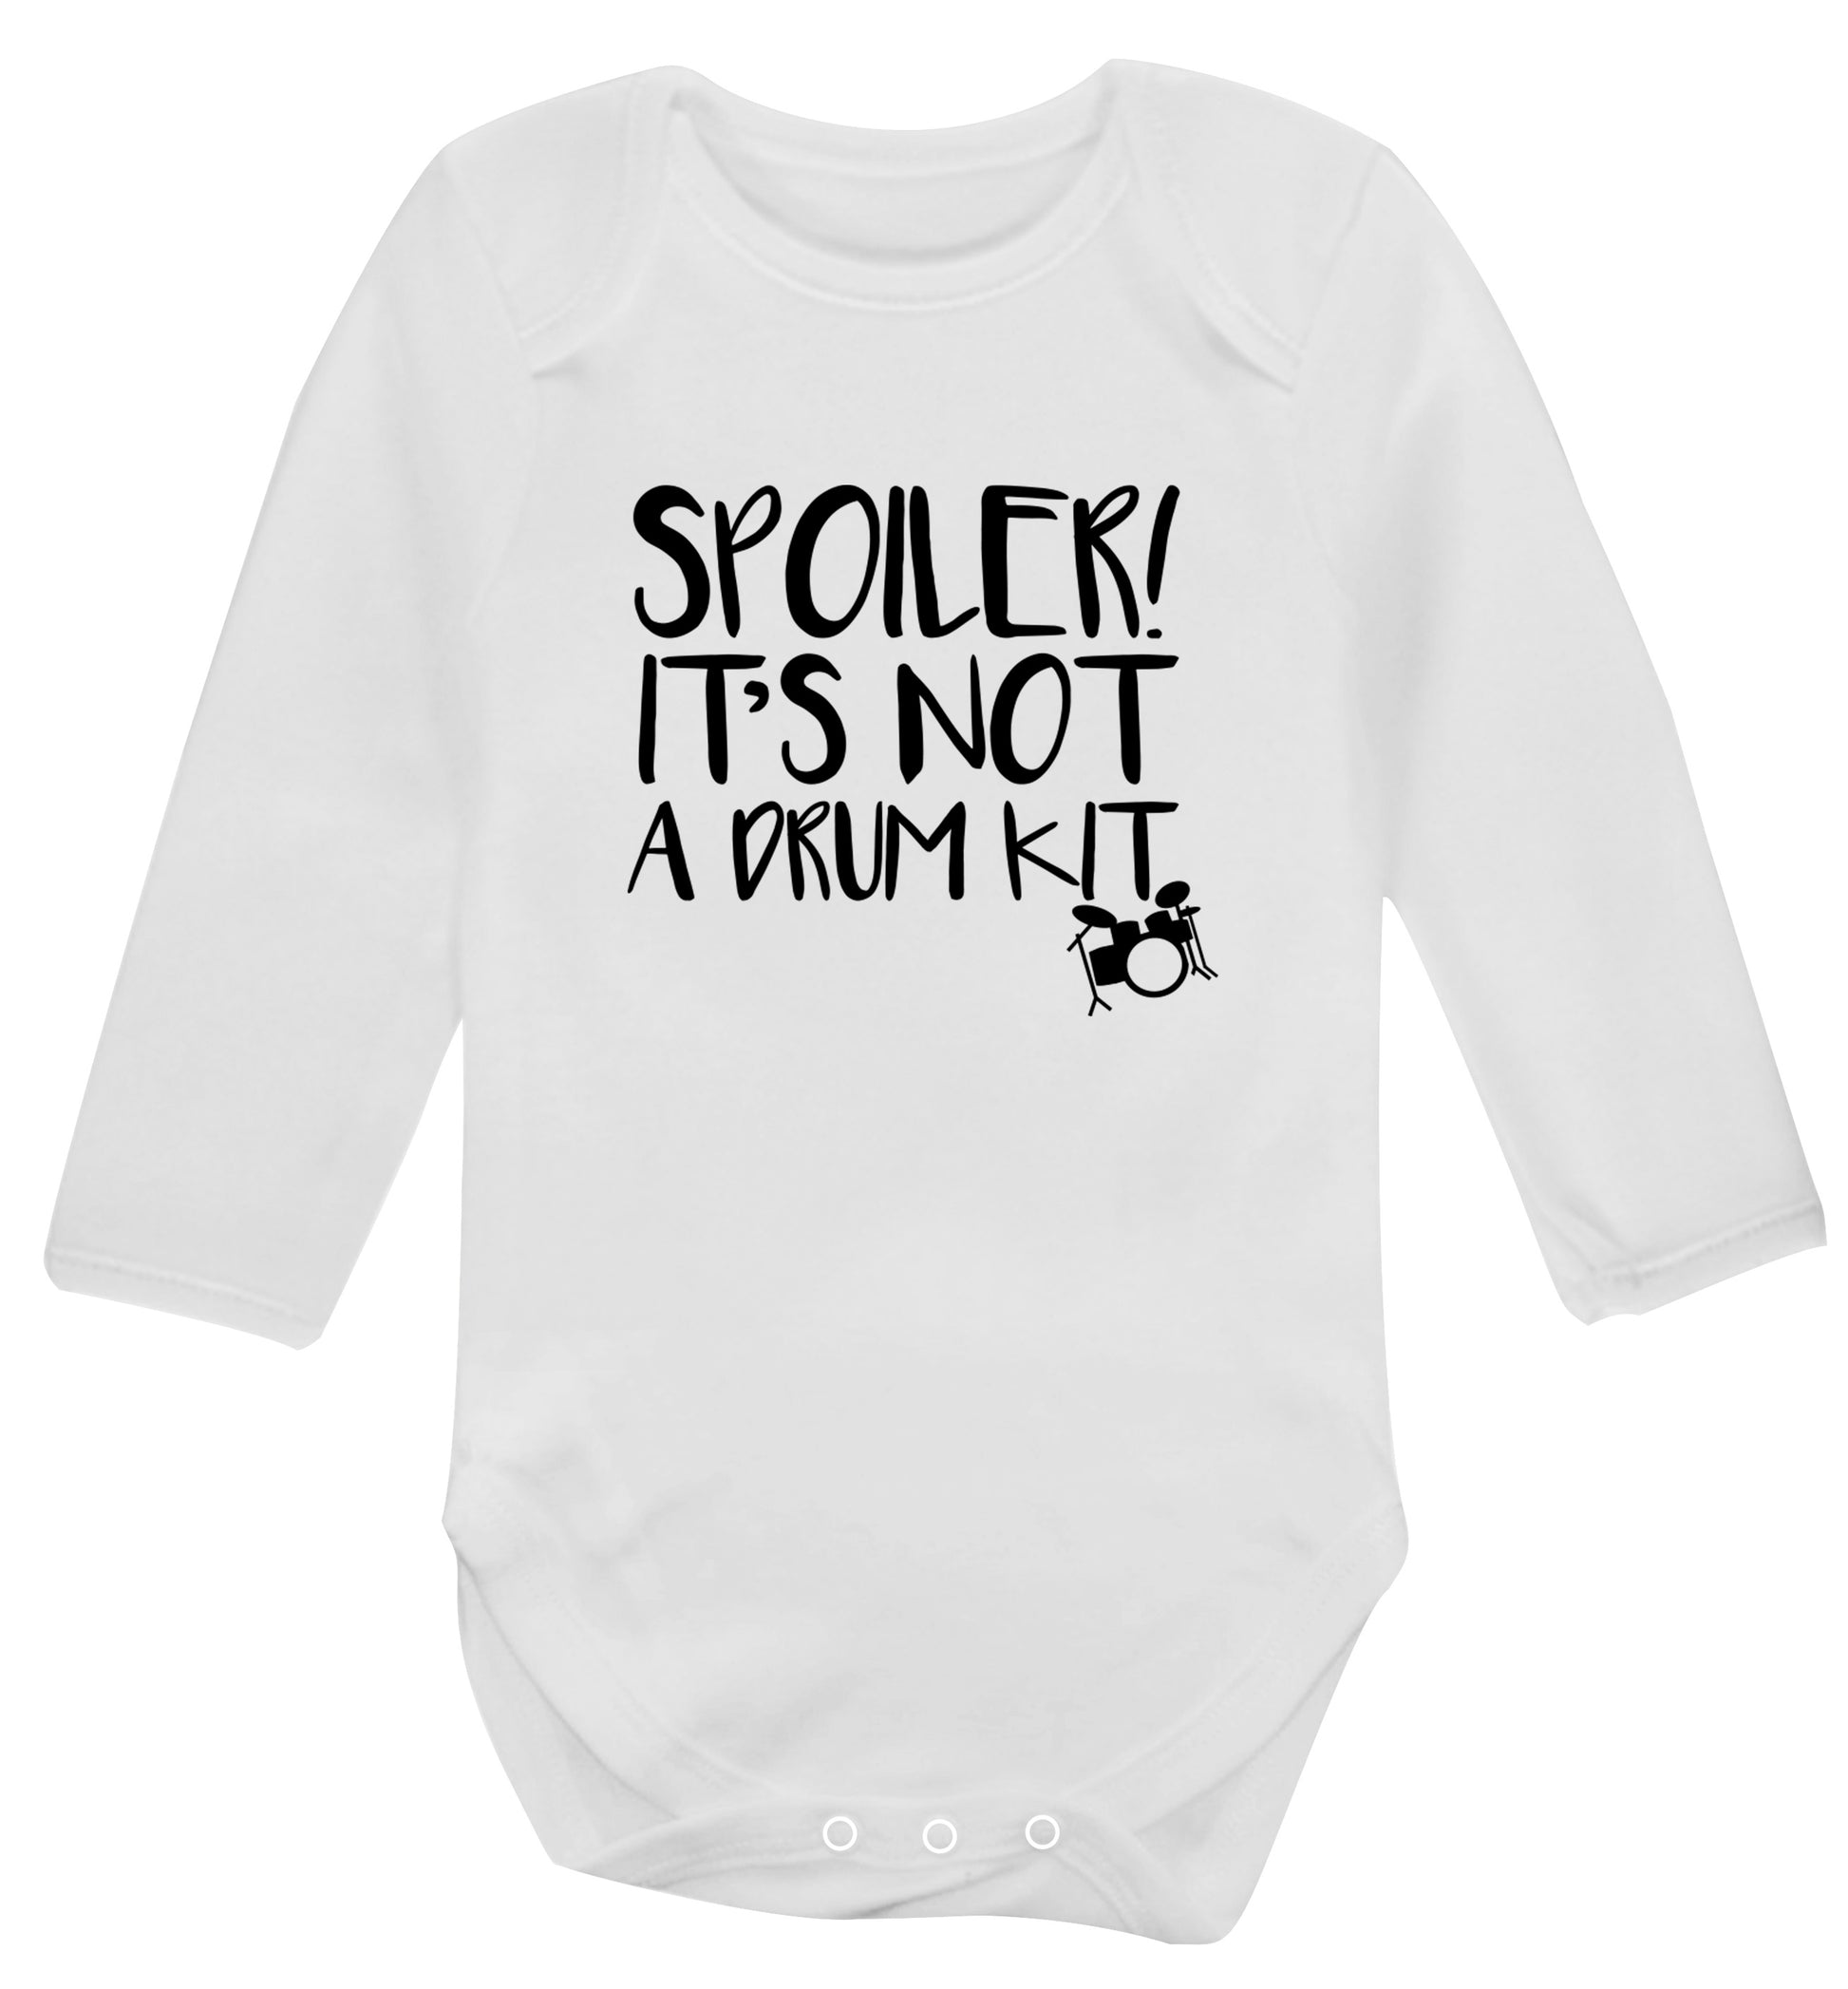 Spoiler it's not a drum kit Baby Vest long sleeved white 6-12 months